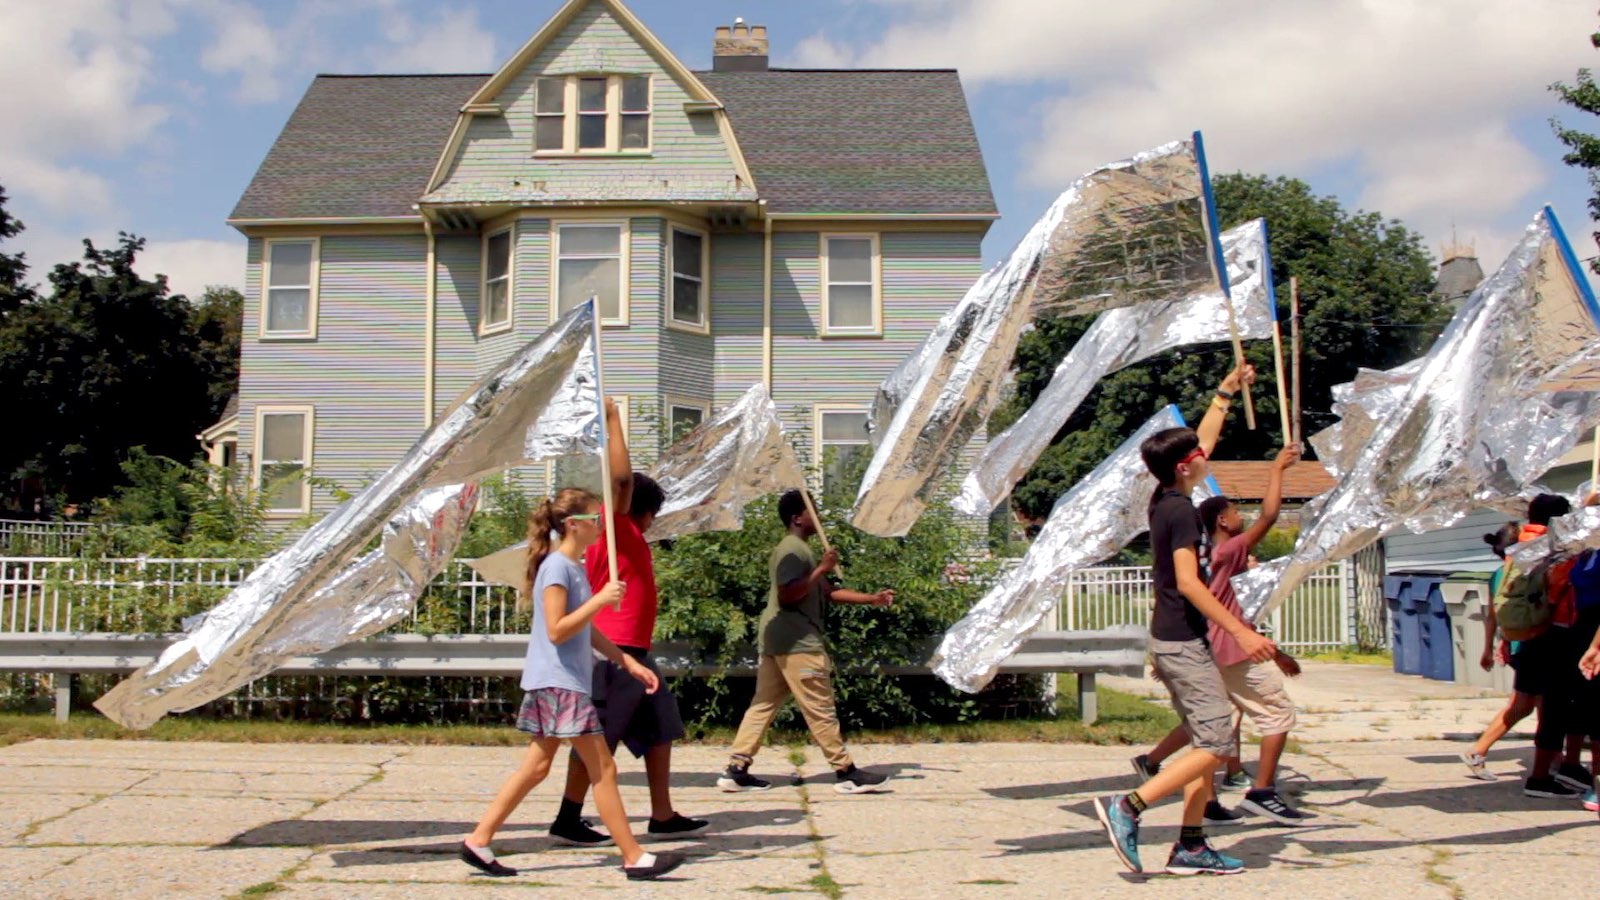 A film video still depicts a group of school-aged children in summer clothes walking down a sunny residential sidewalk, facing the right of the frame. They hold flags on long wooden poles made of silver space blankets. Behind them is an aging, light blue, three-storey house and rows of residential recycling and garbage bins.